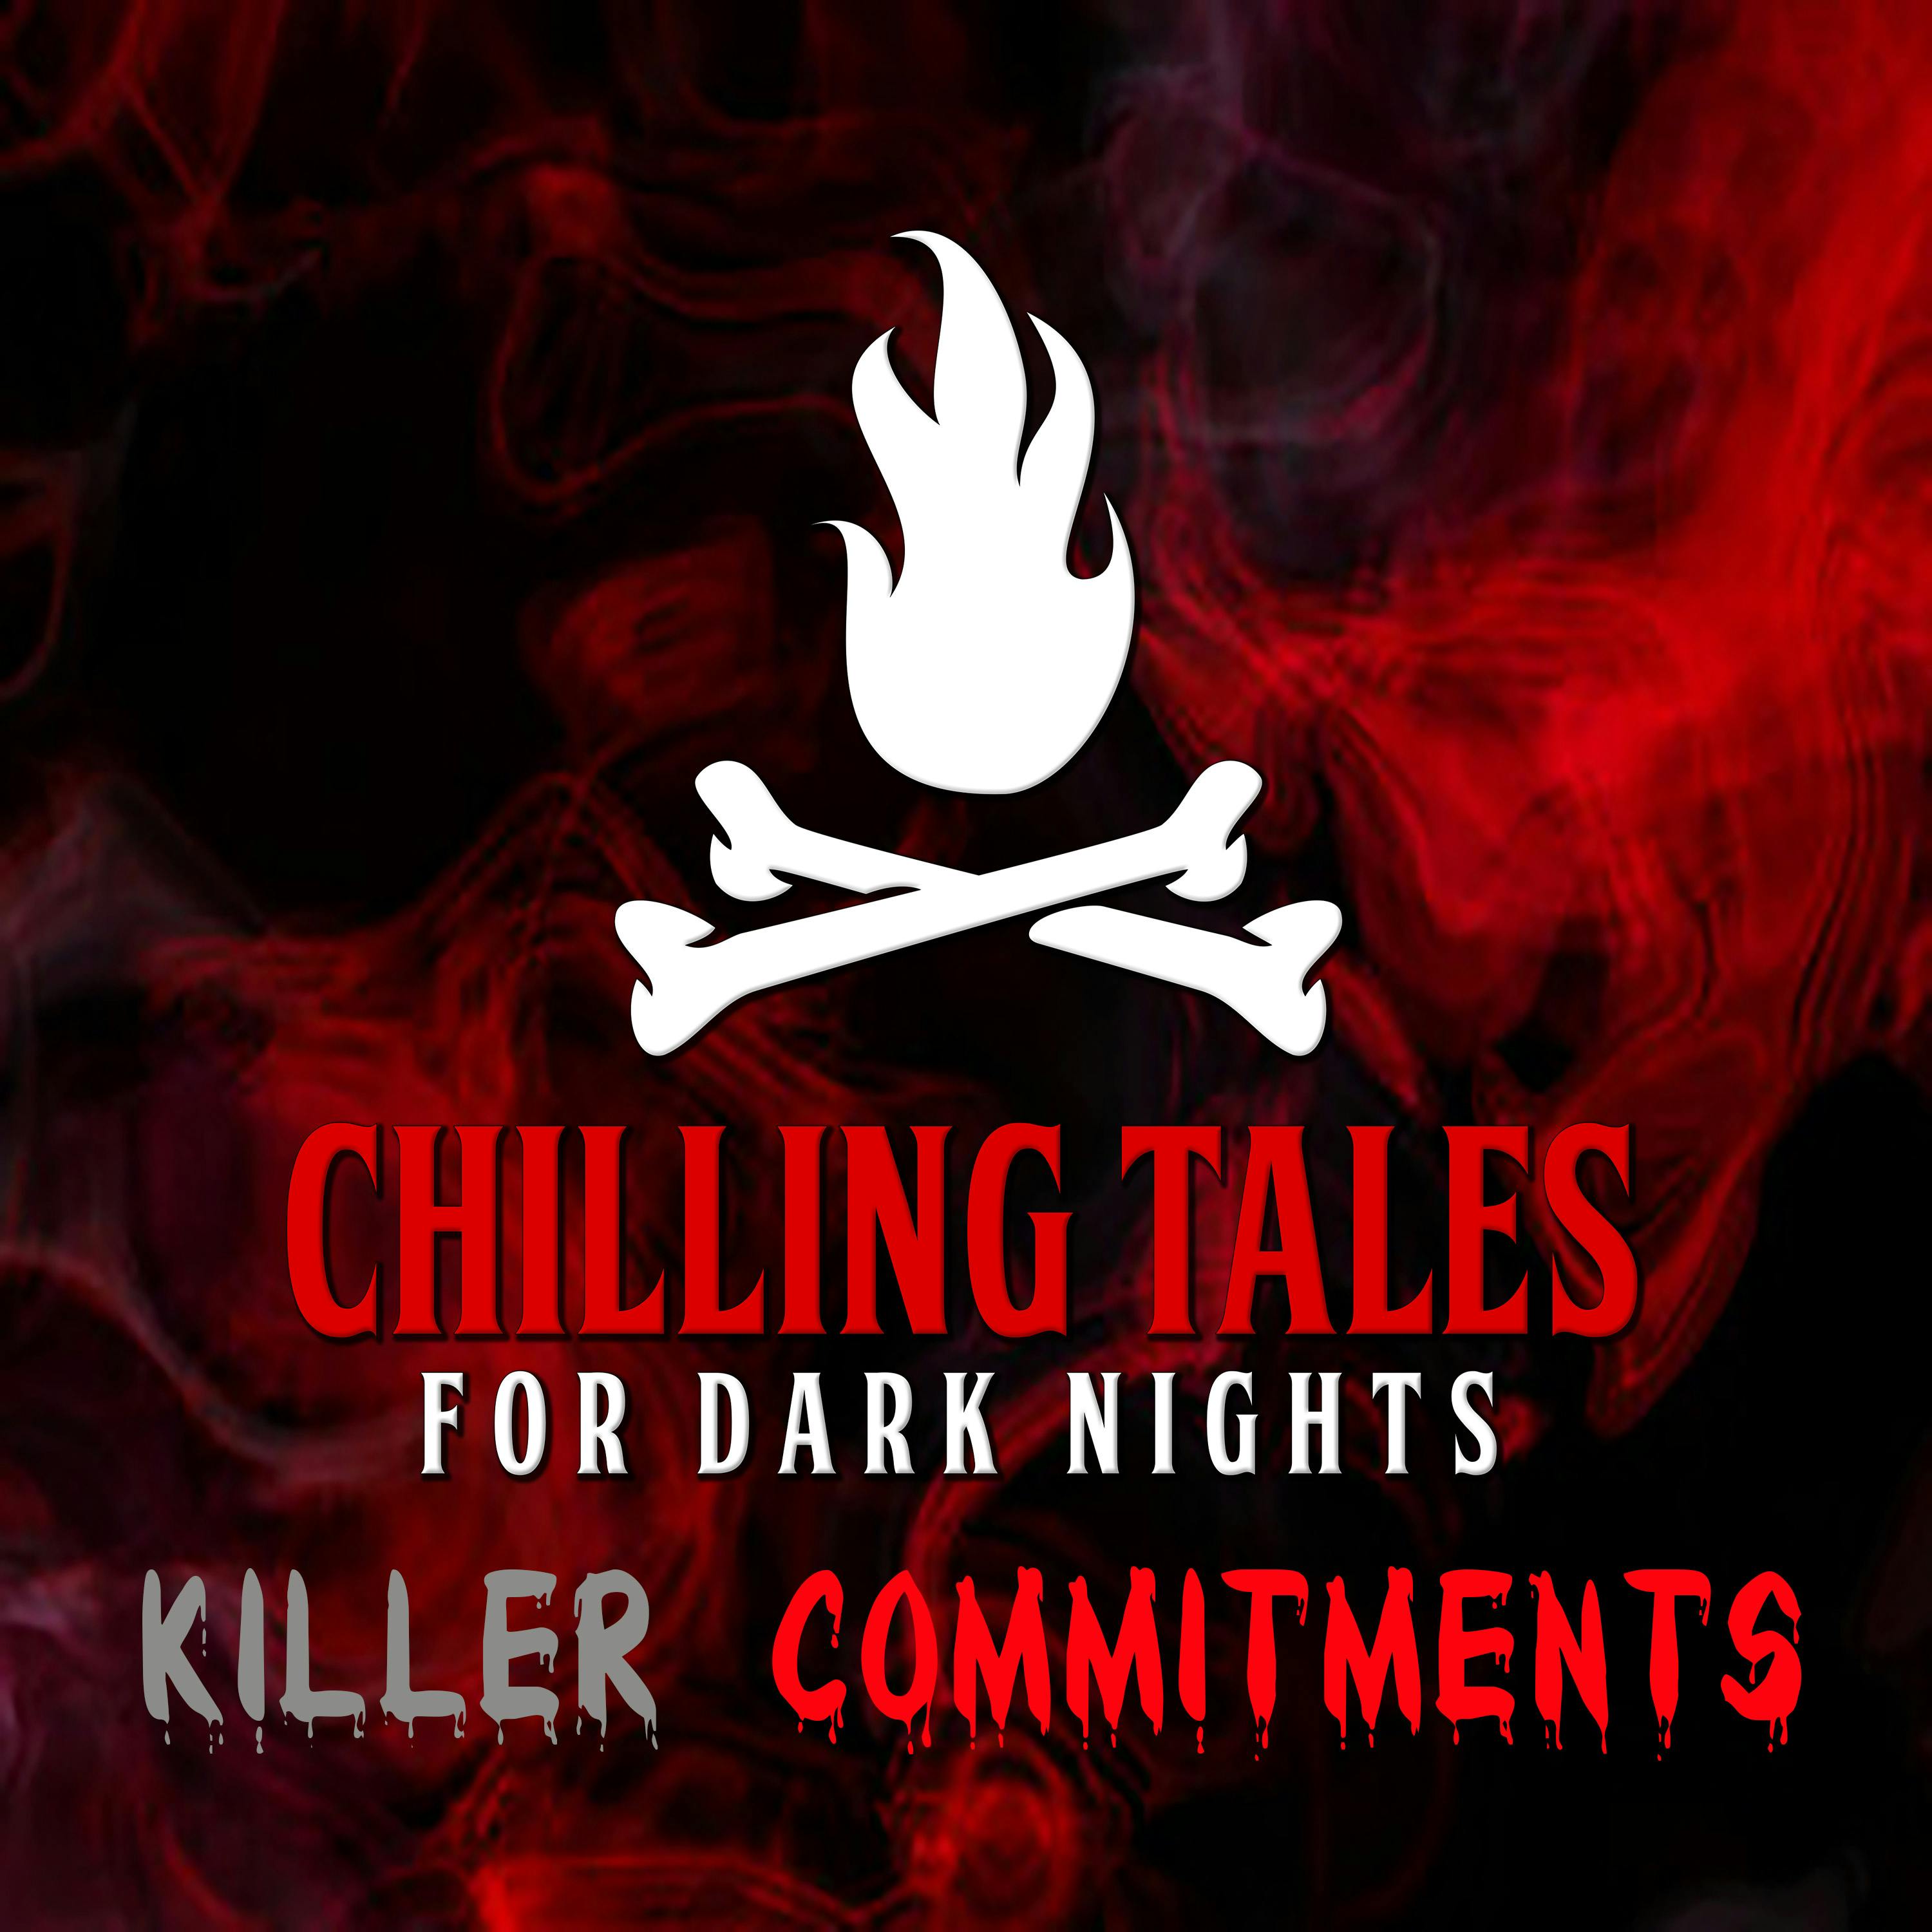 190: Killer Commitments - Chilling Tales for Dark Nights